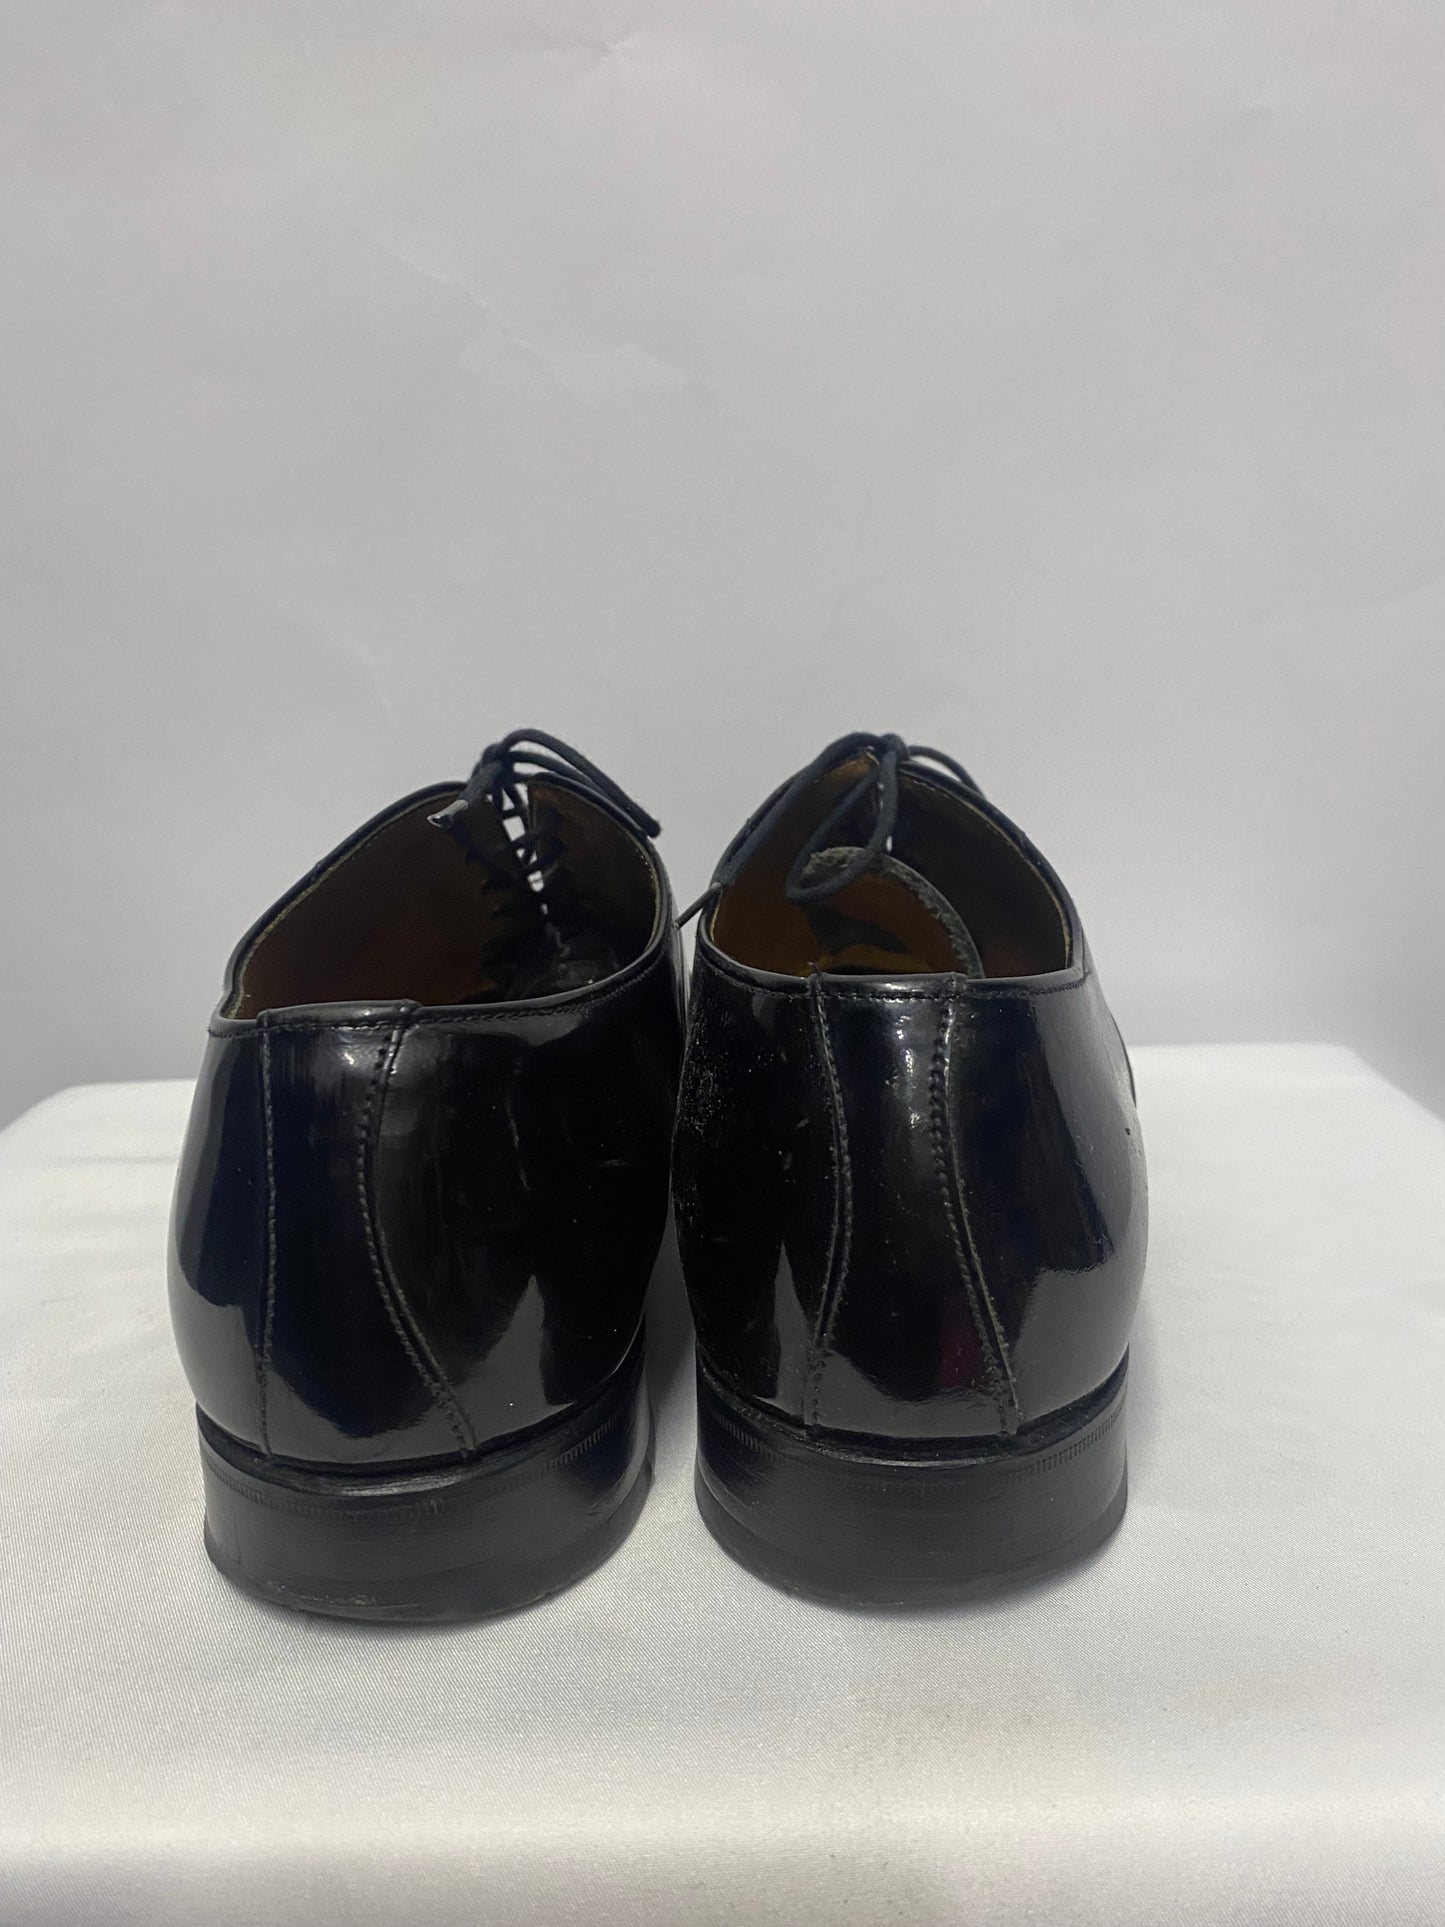 Alfred Sargent Black Patent Leather Oxford Brogues 7